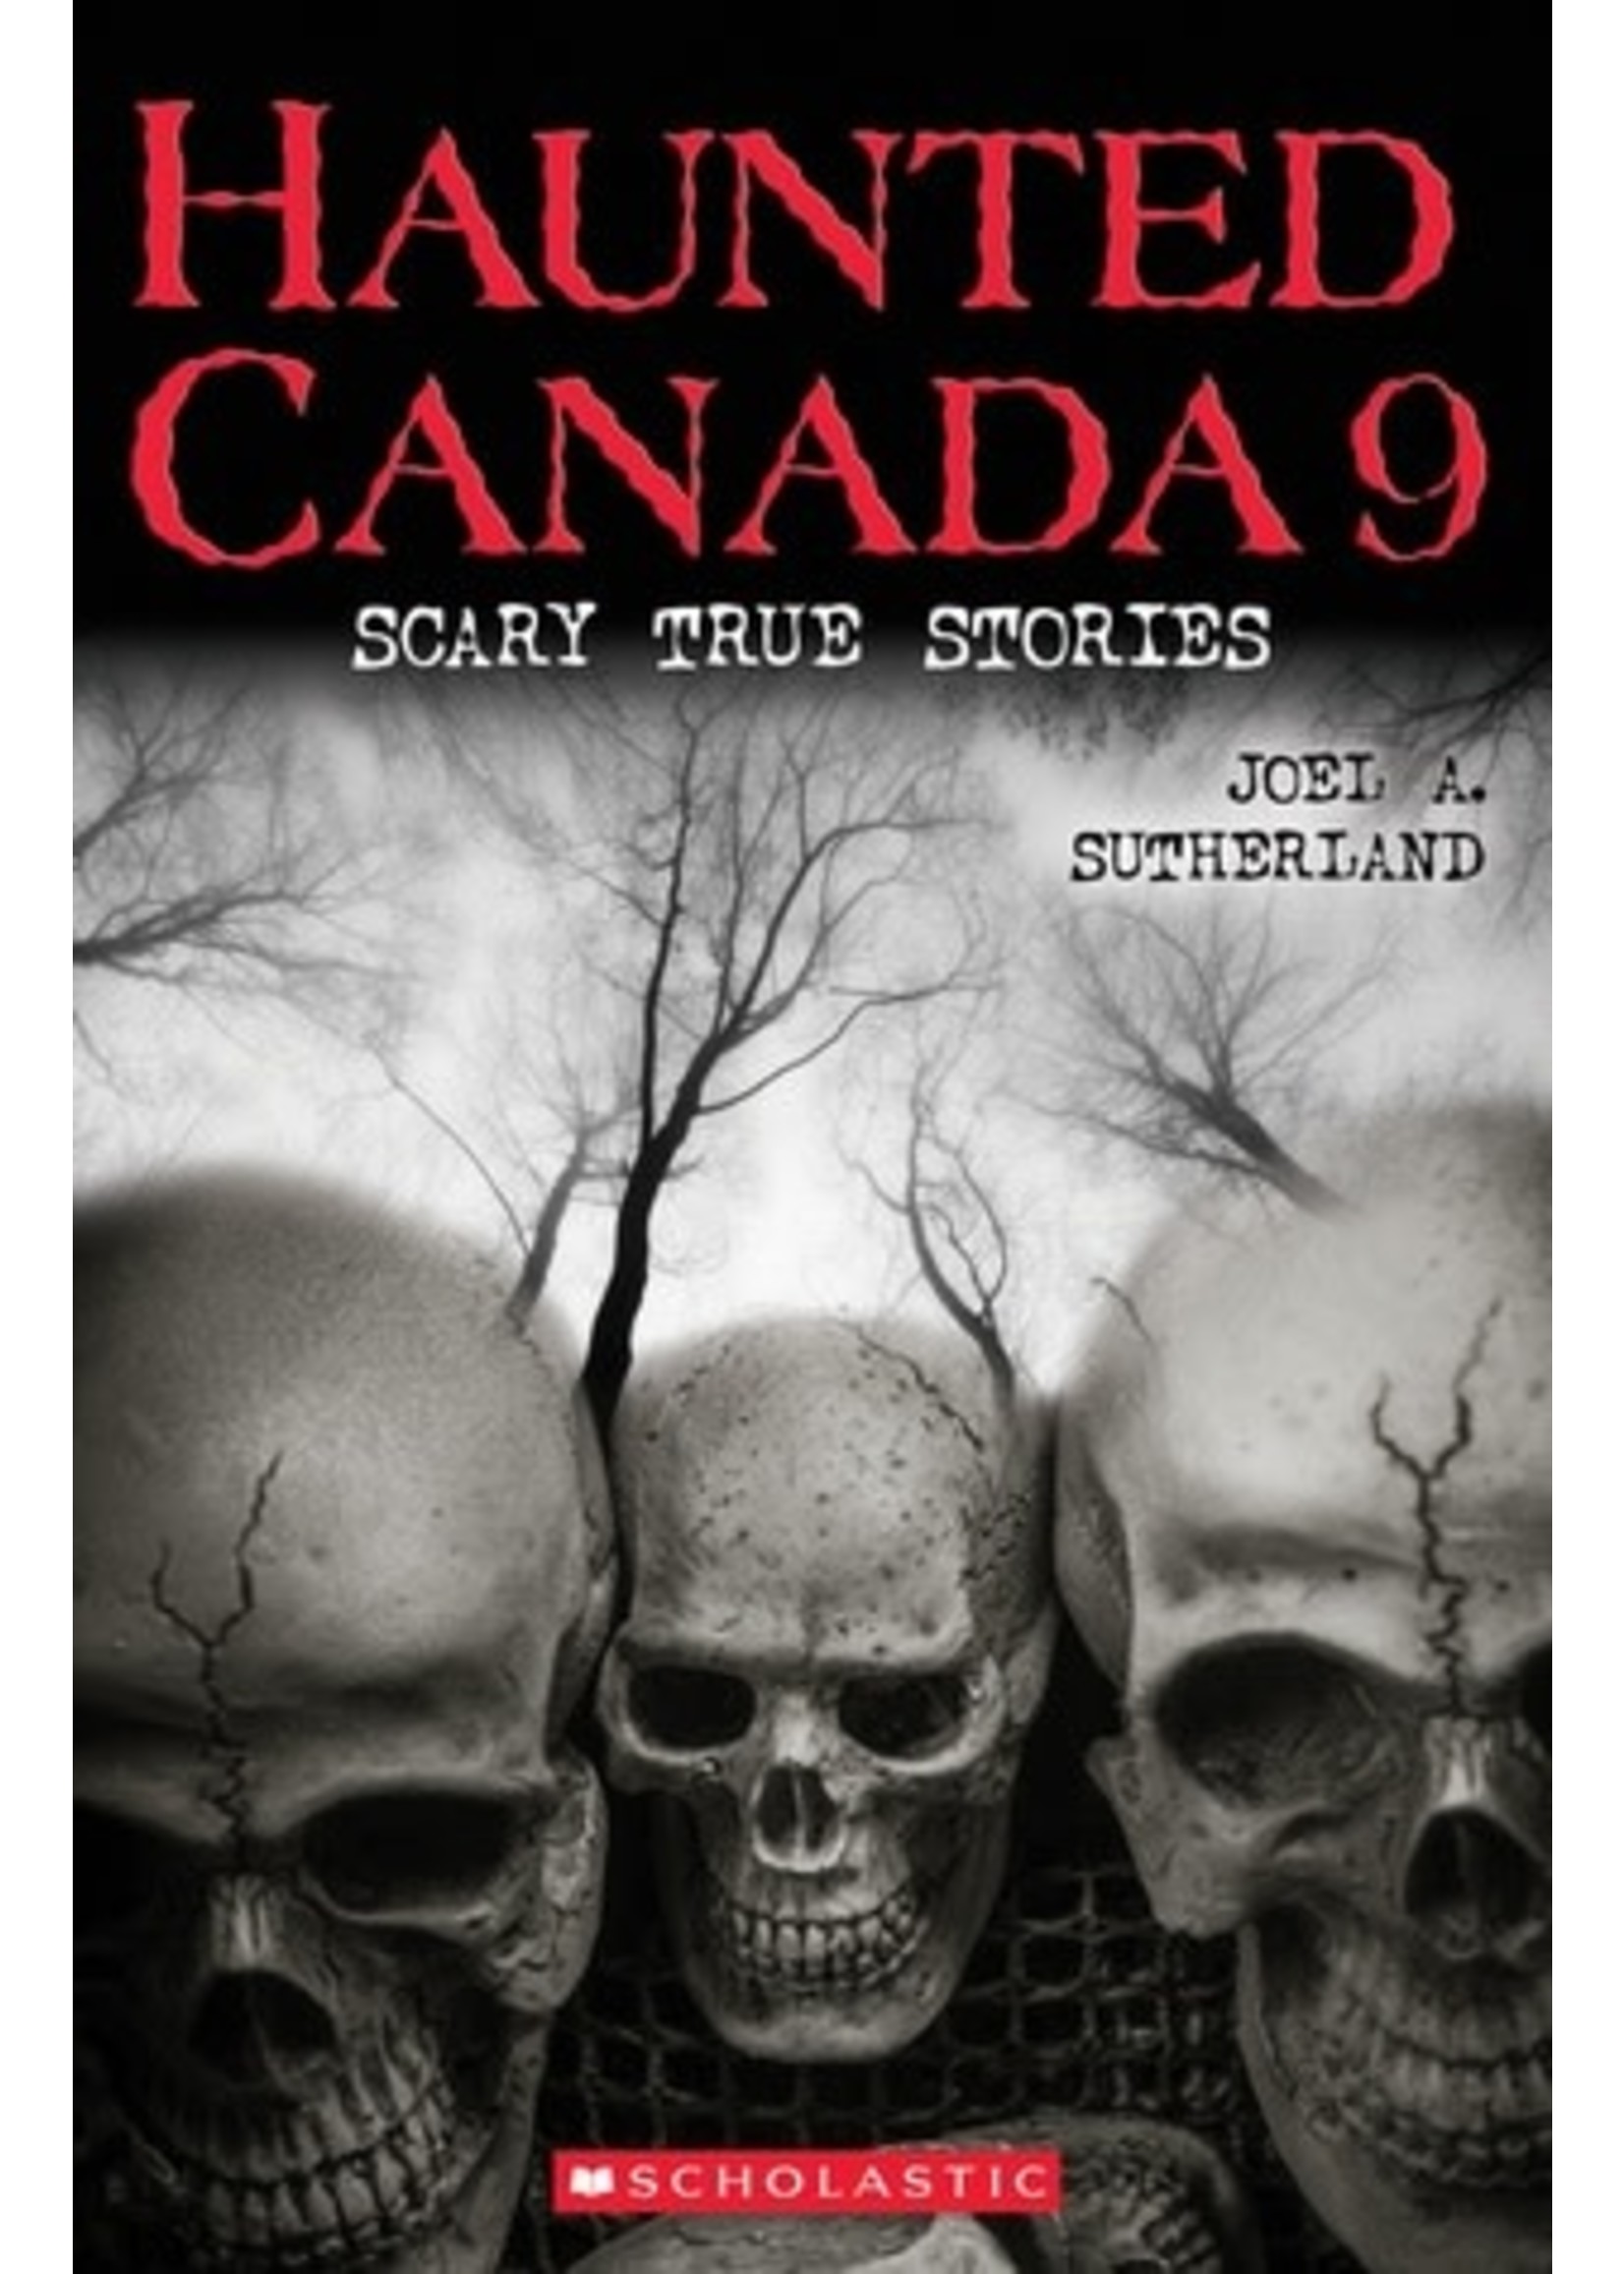 Haunted Canada 9: Scary True Stories by Joel A. Sutherland